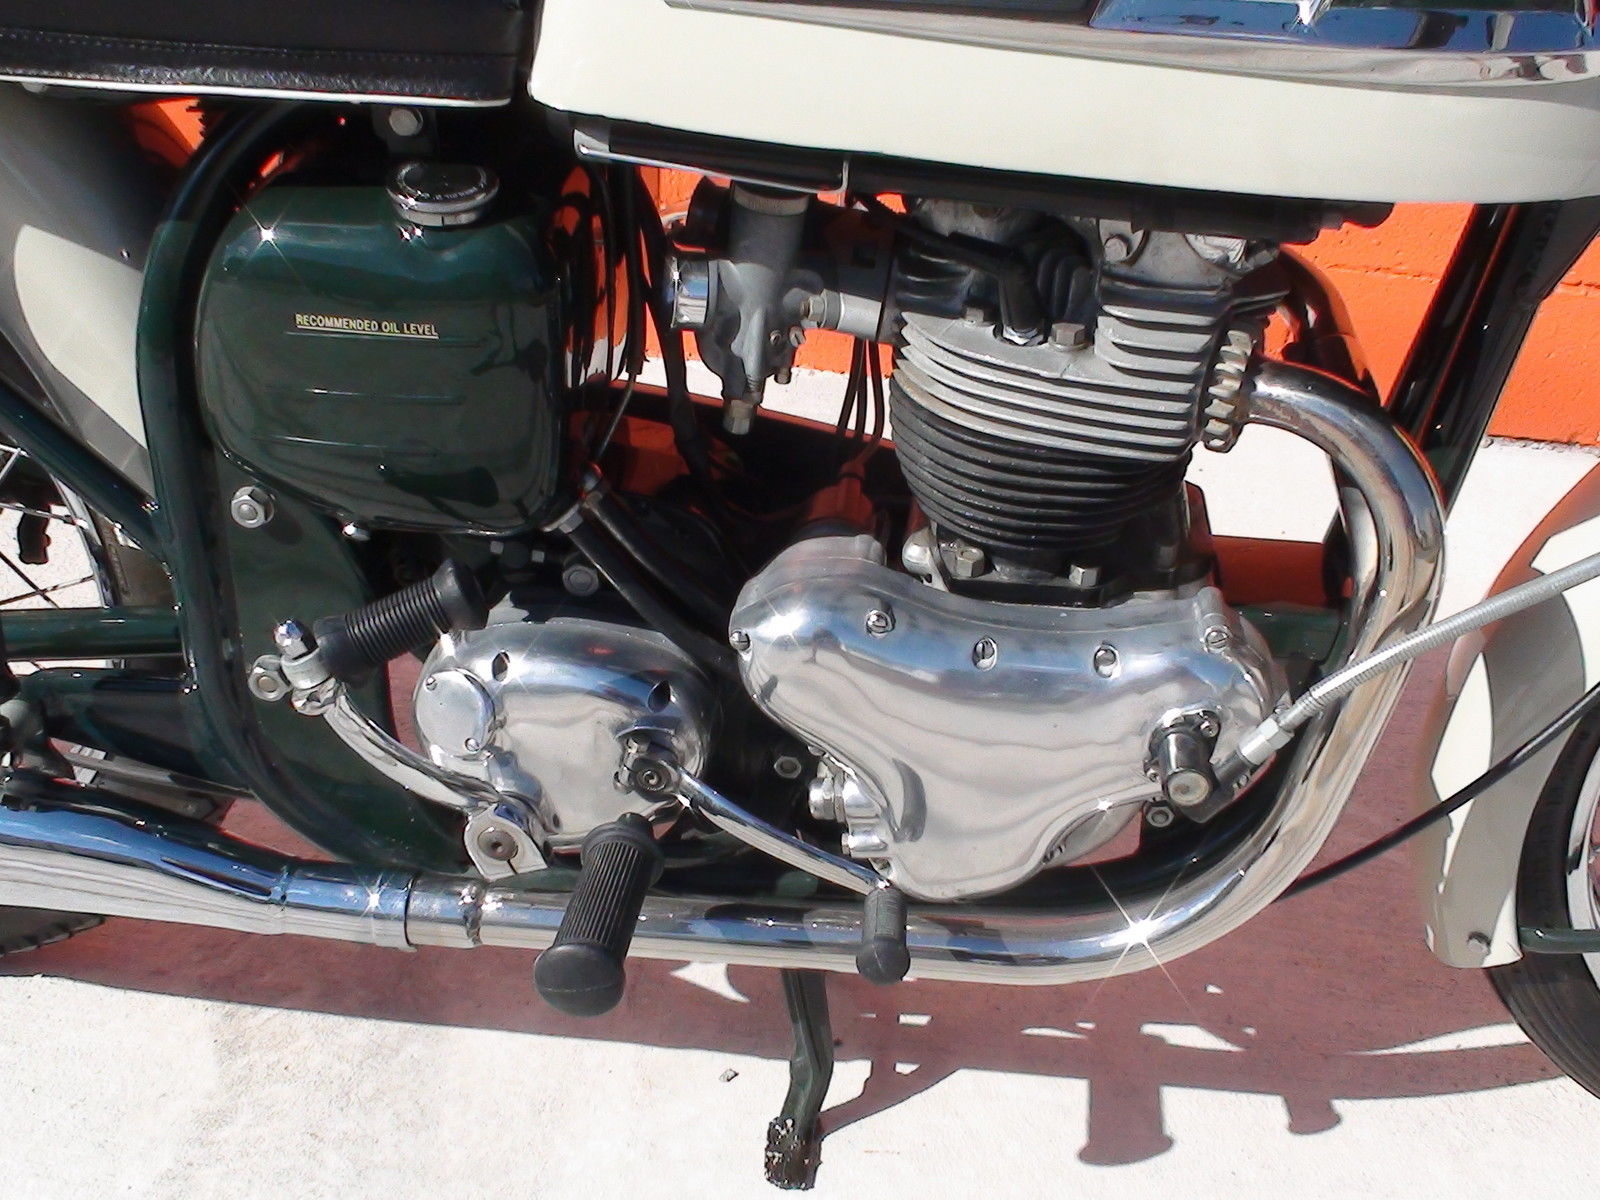 Norton Dominator 88 - 1960 - Kick Start, Timing Cover, Gearbox and Gear Change.